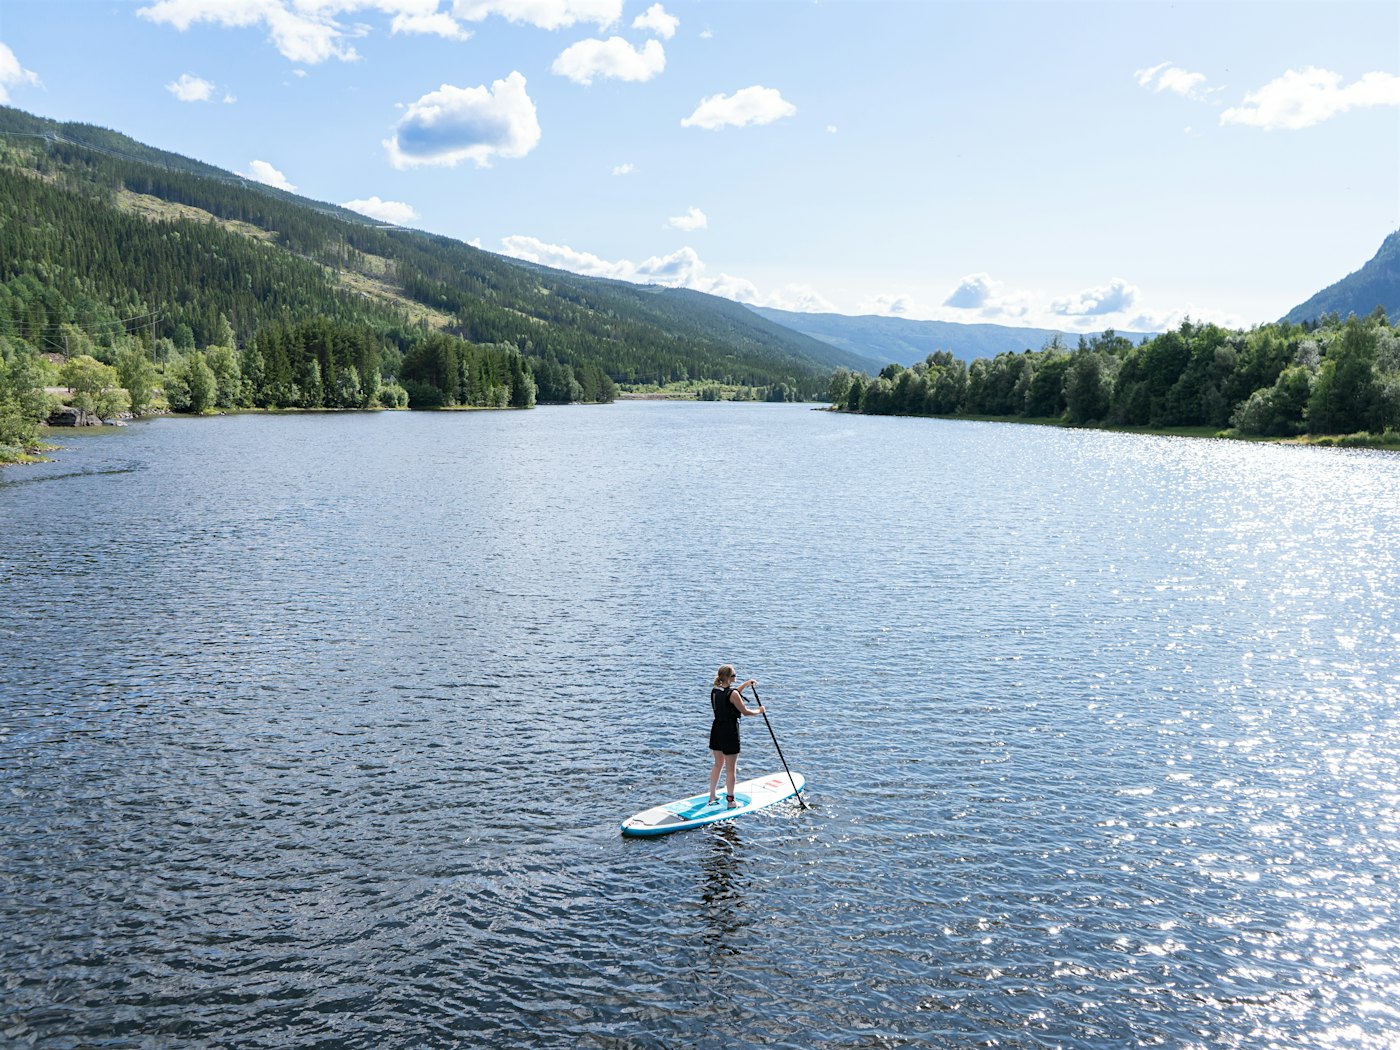 Girl on a SUP board on the river in Hallingdal. Photo